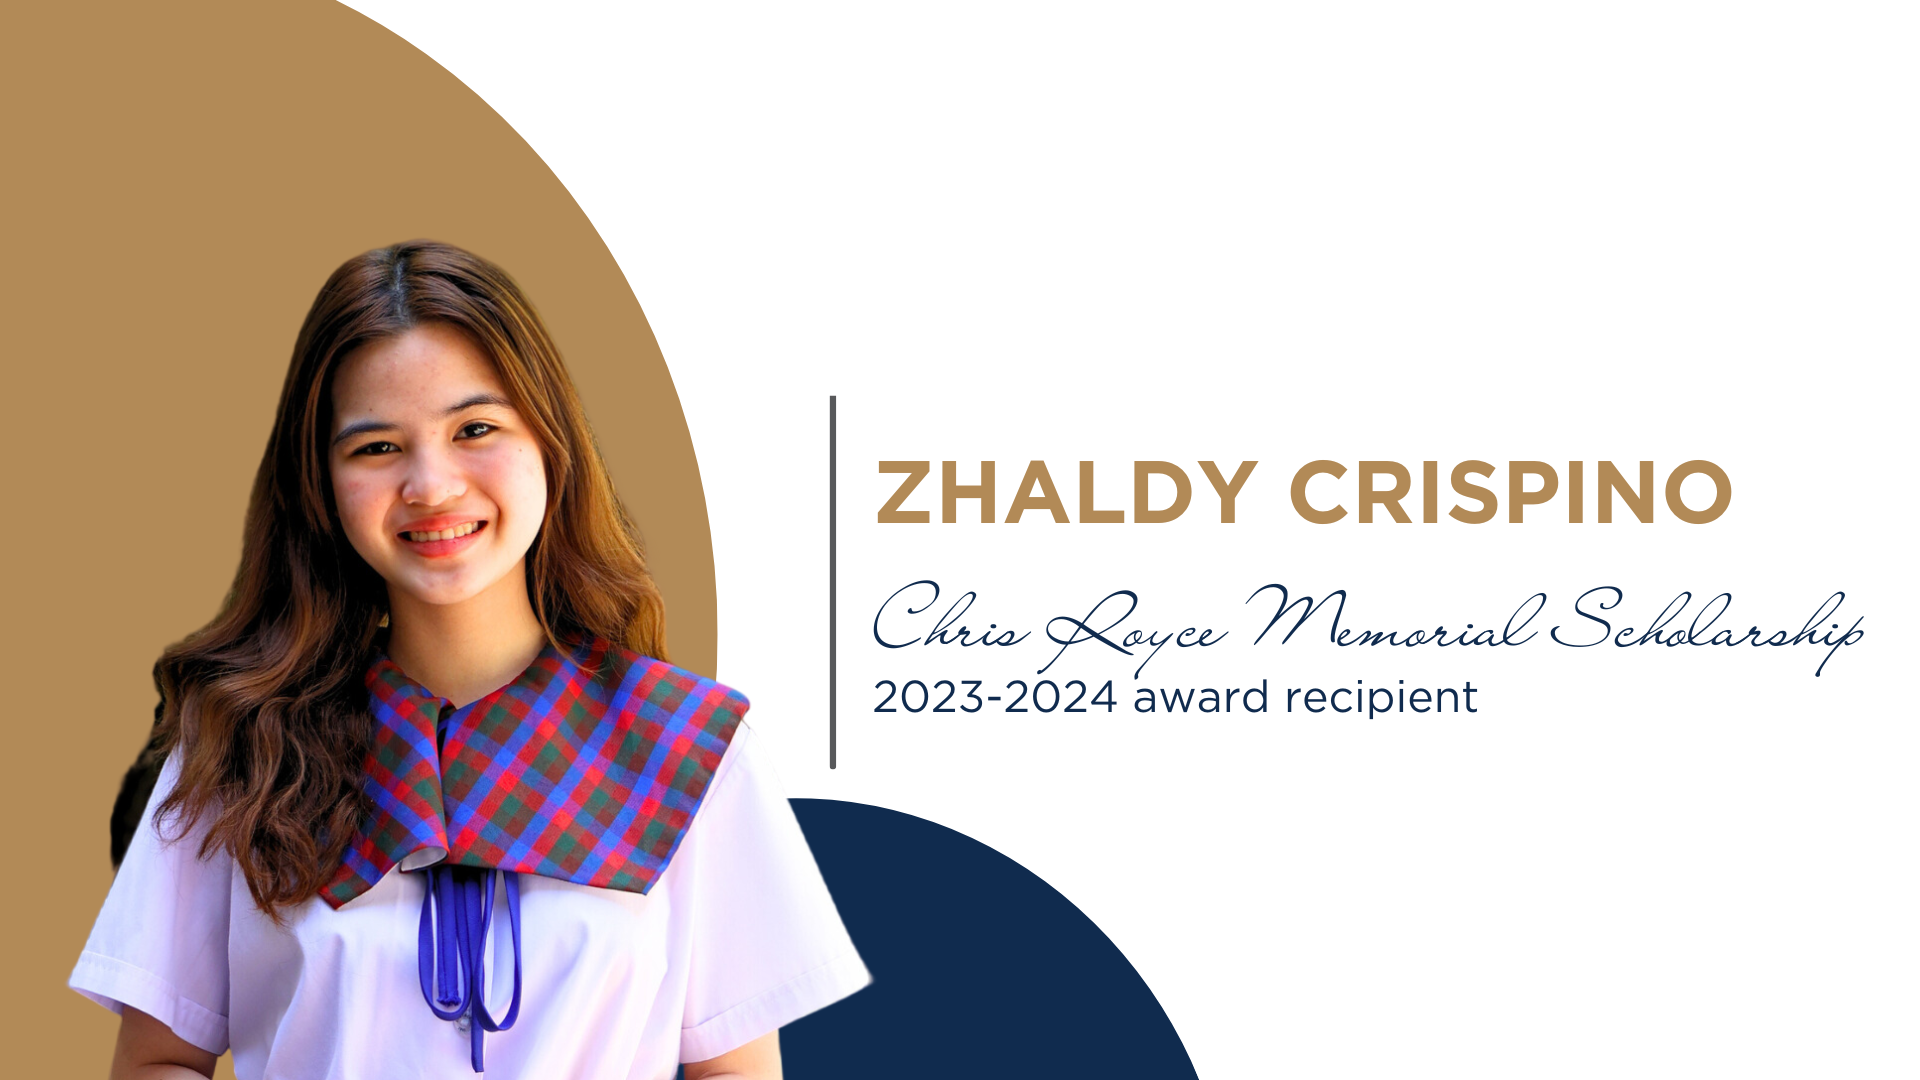 Zhaldy Crispino | Going above and beyond—Zhaldy shows exemplary leadership in both her classroom and community at Rosedale’s first partner school in the Philippines